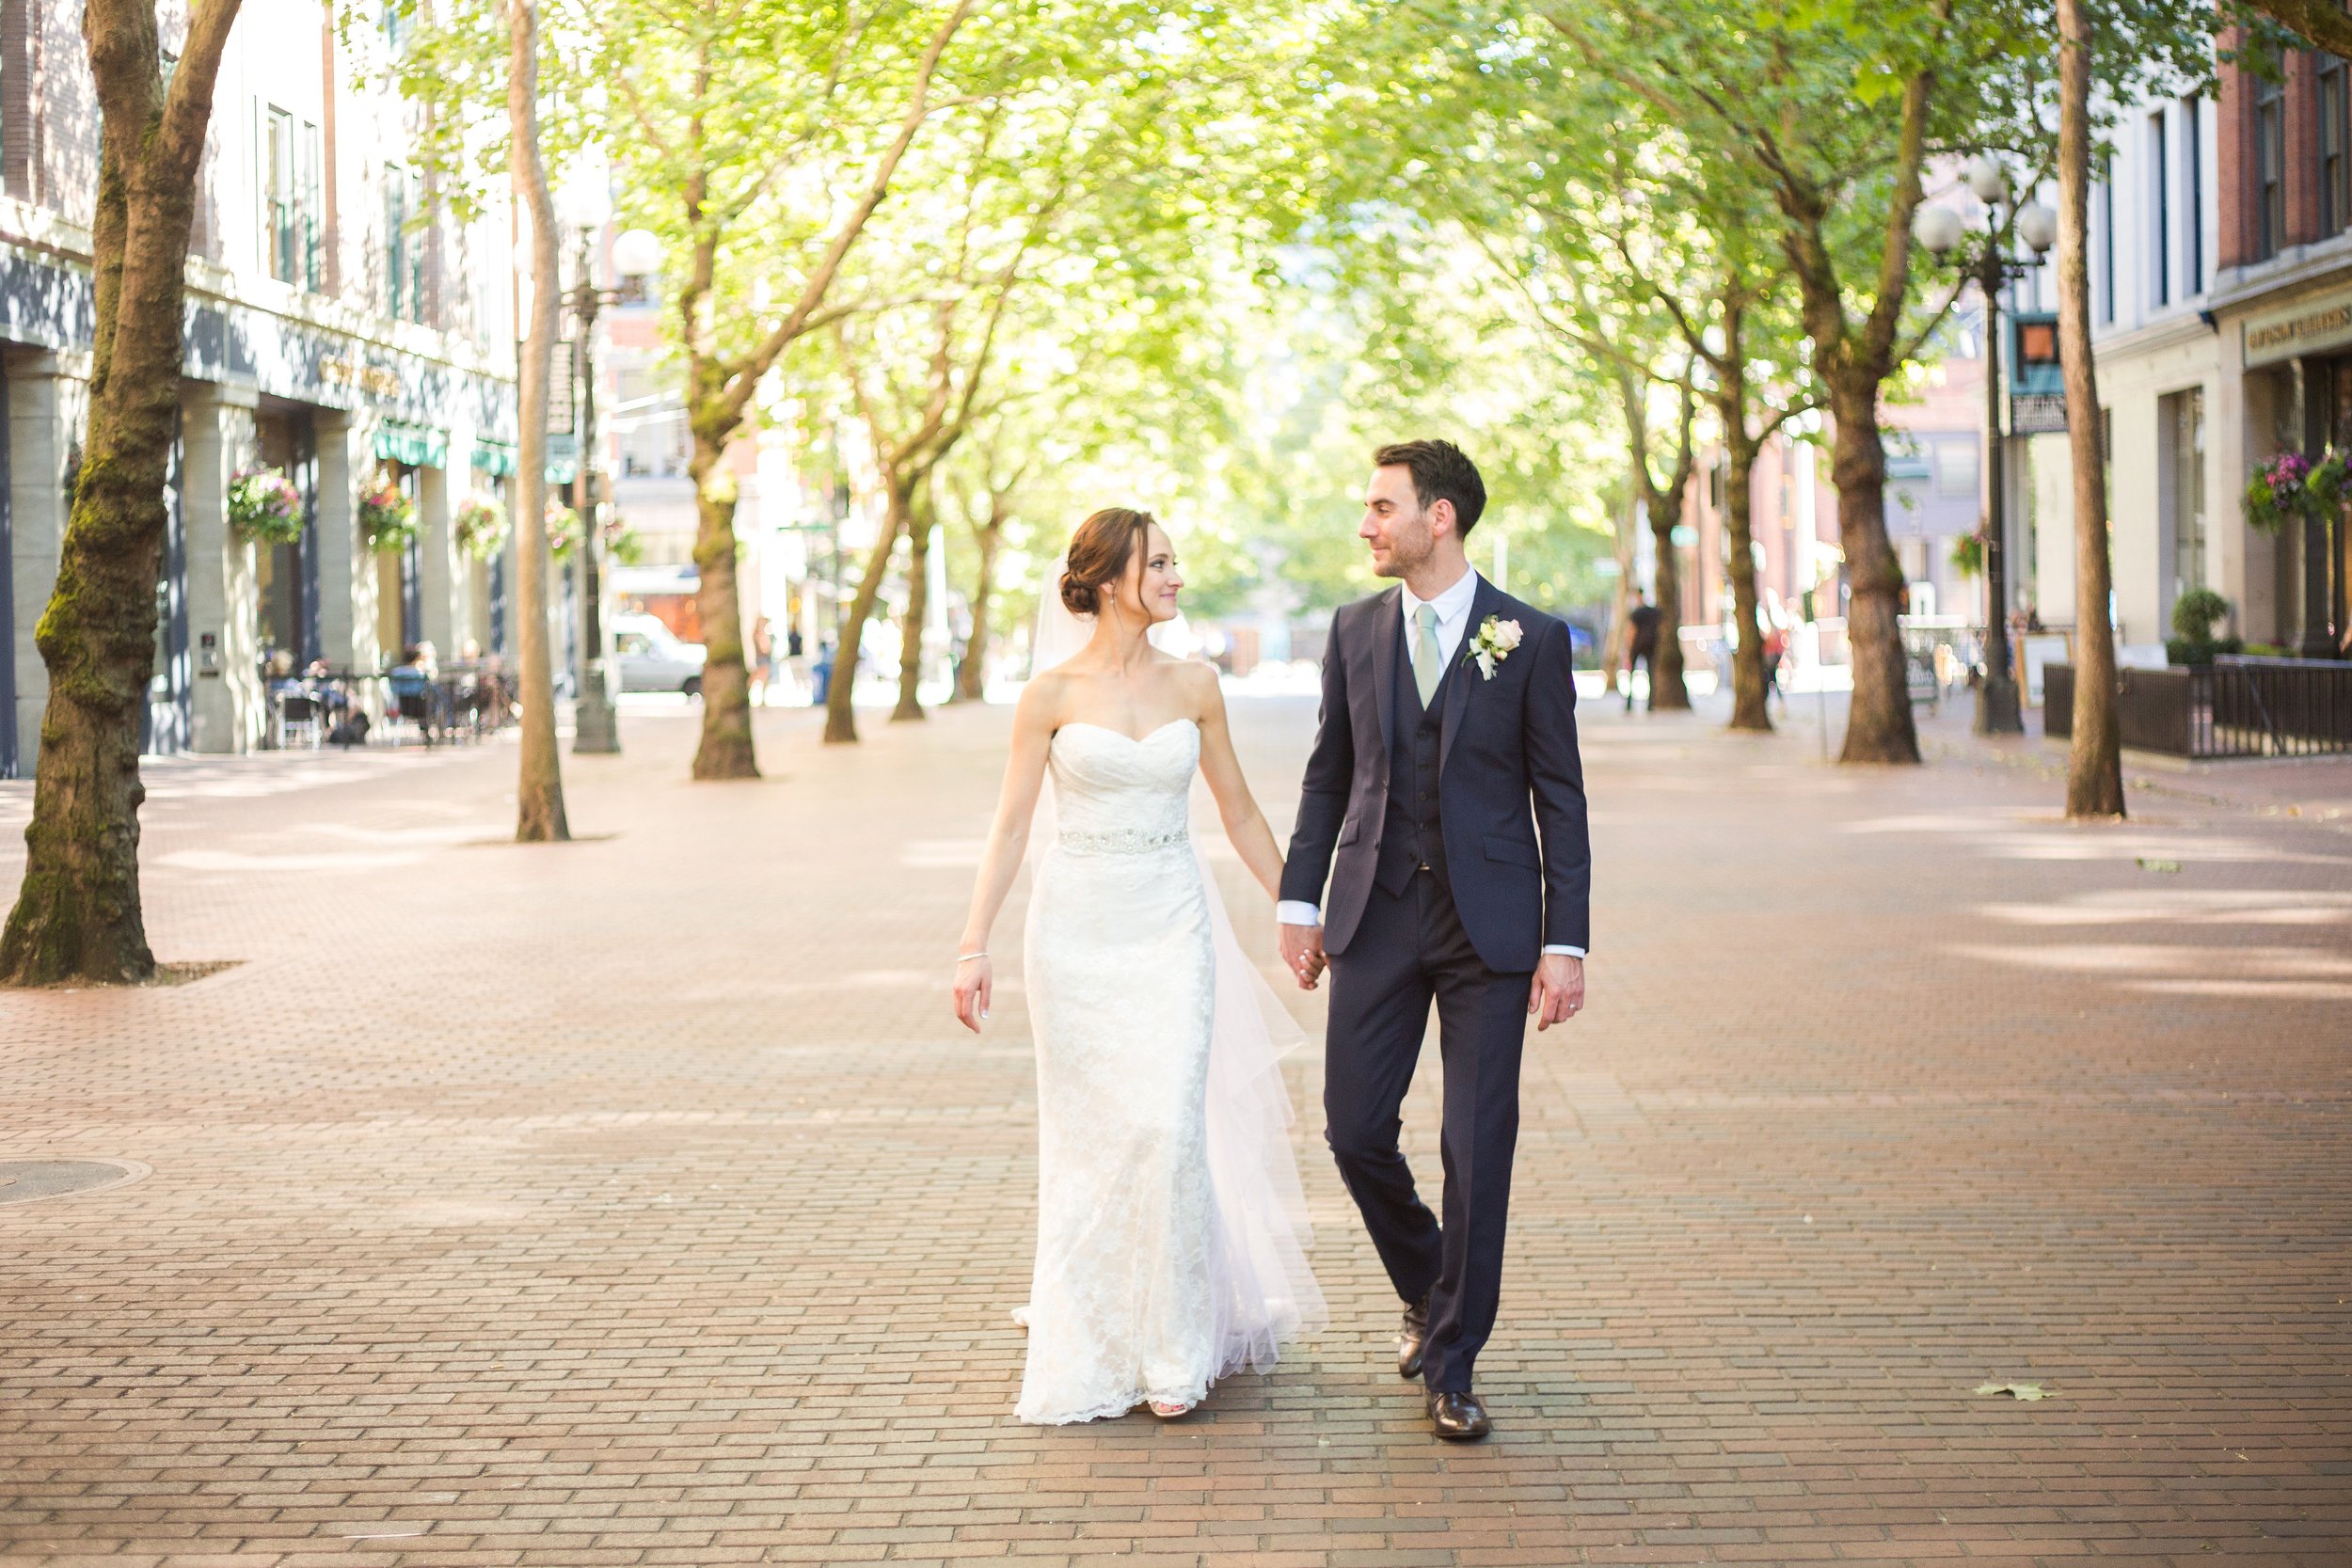  “Rachel and her team were an absolute DREAM! We planned our Seattle wedding from our hometown of London. Rachel was always quick to respond with wonderfully energetic emails. Rachel is so warm, calm, and friendly and it was like having an extra fami